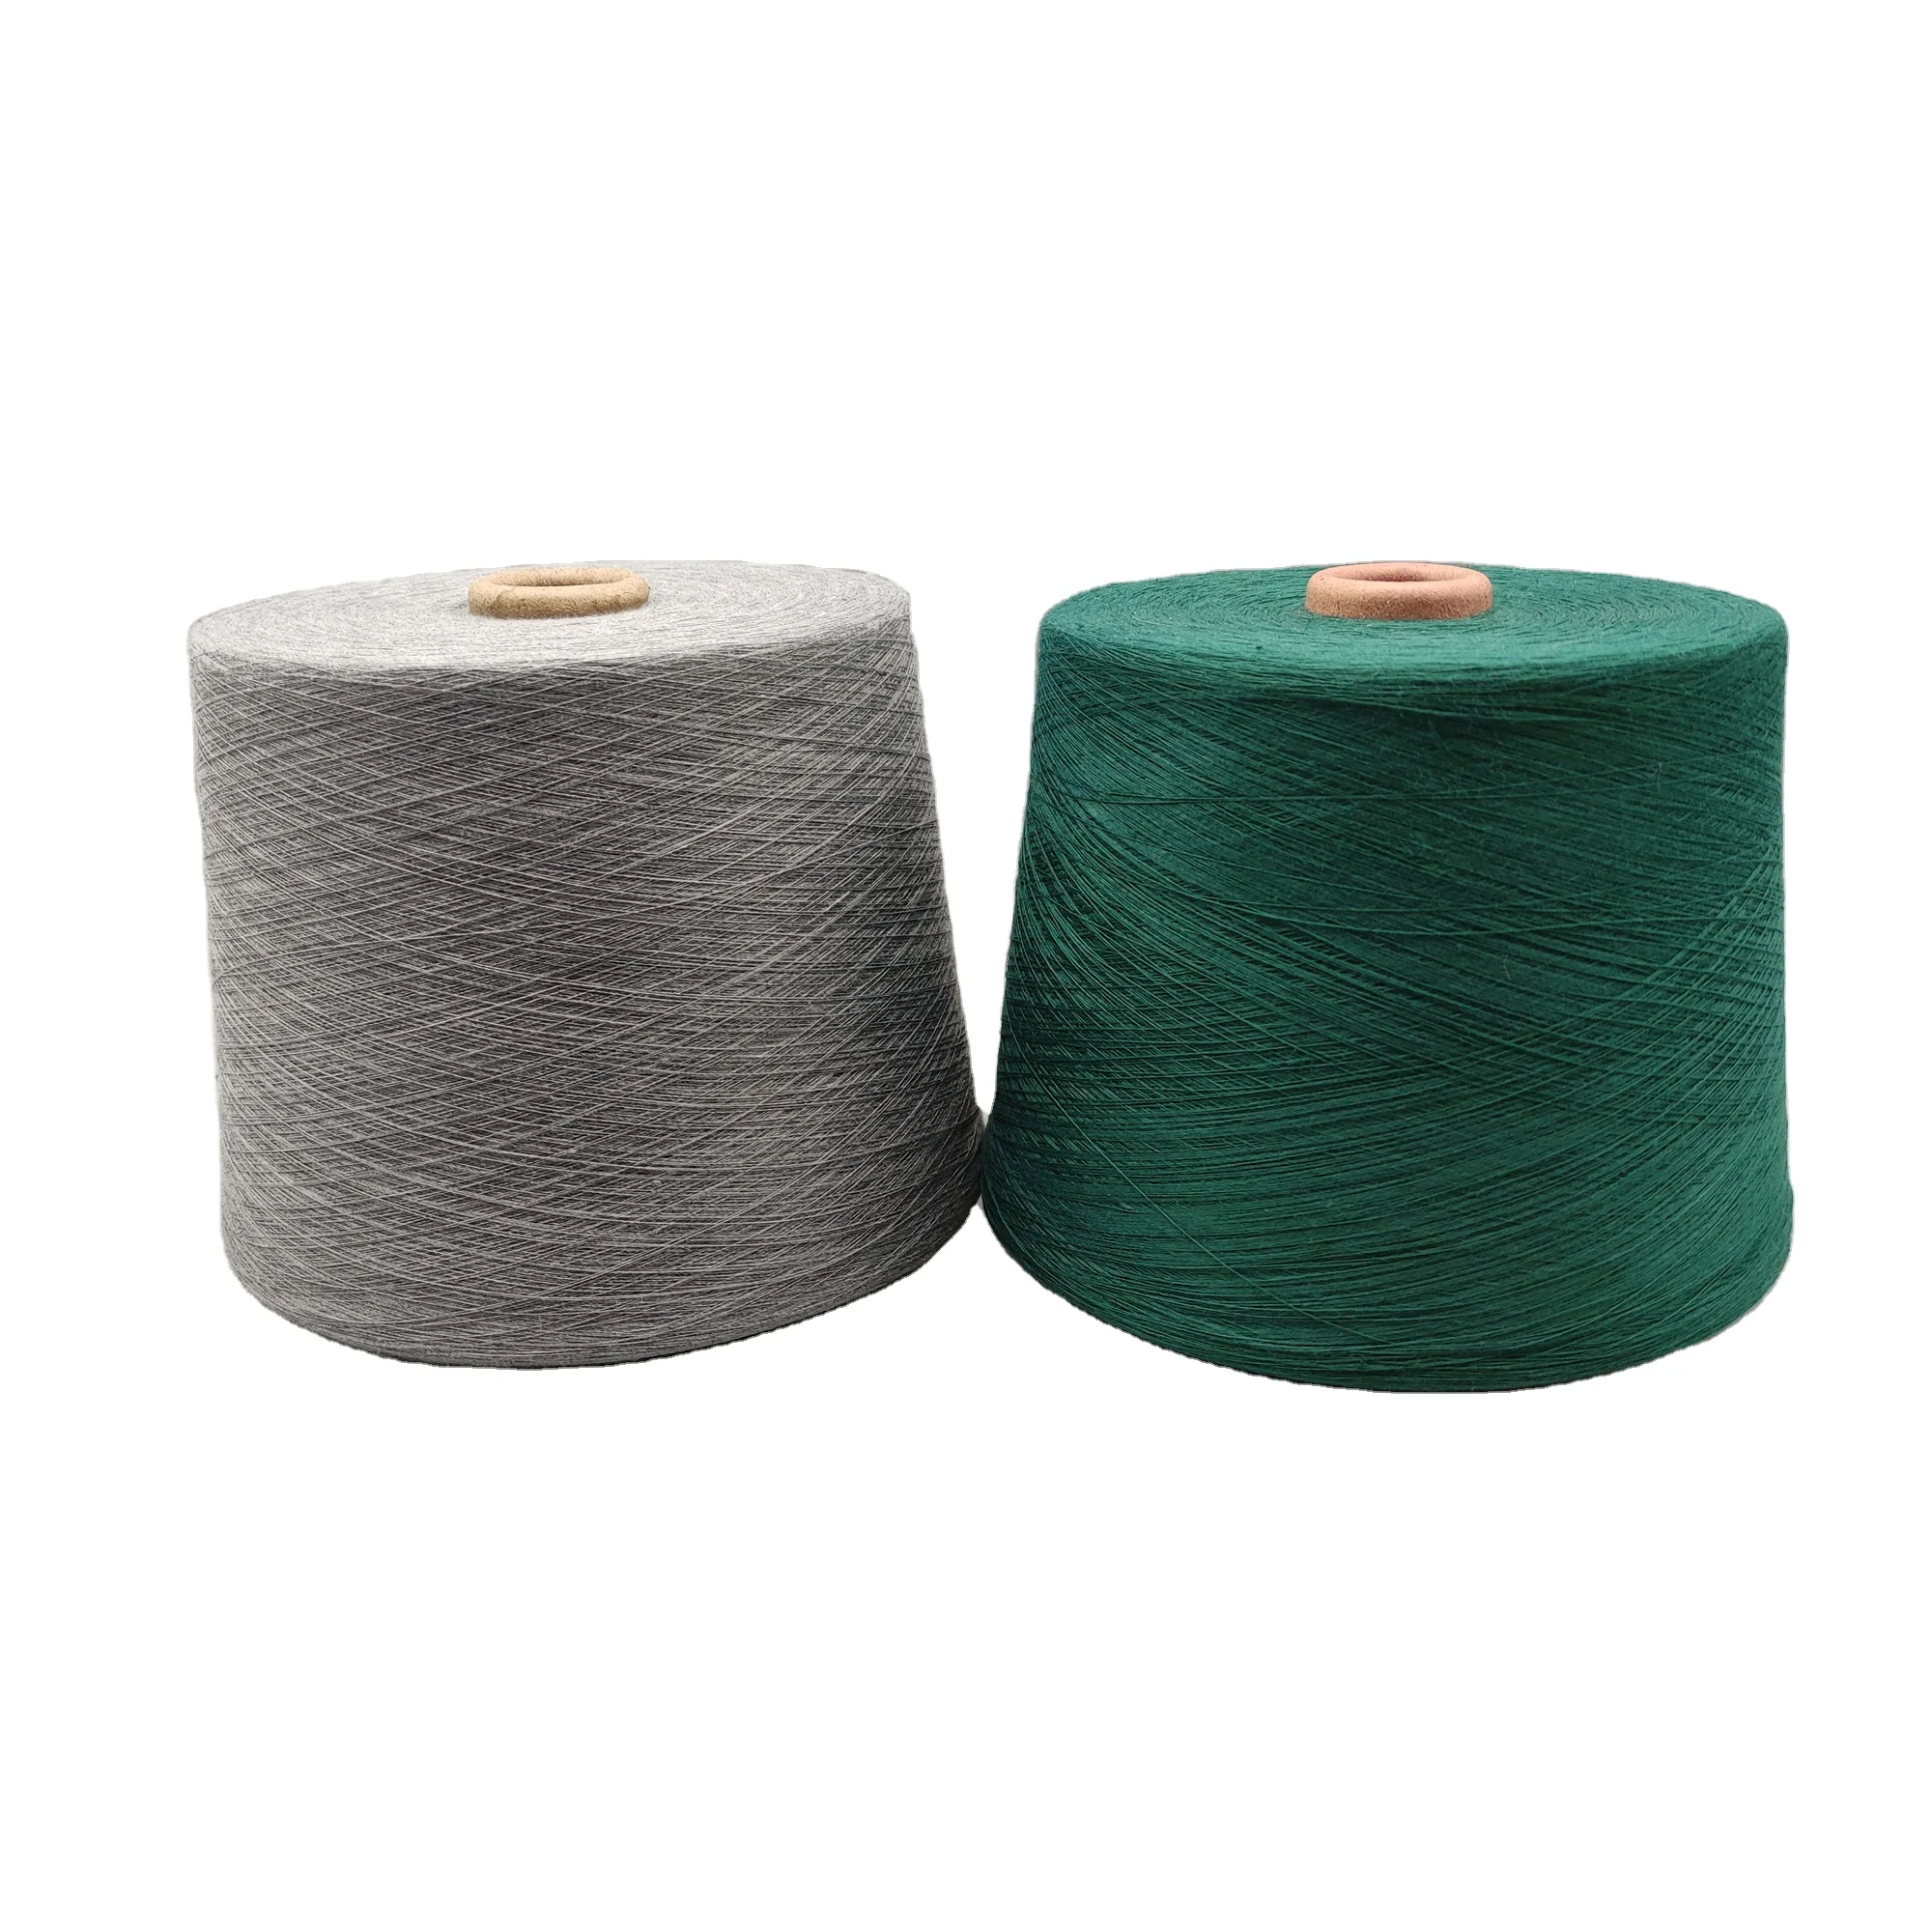 21S color recycled cotton yarn  for knitting socks